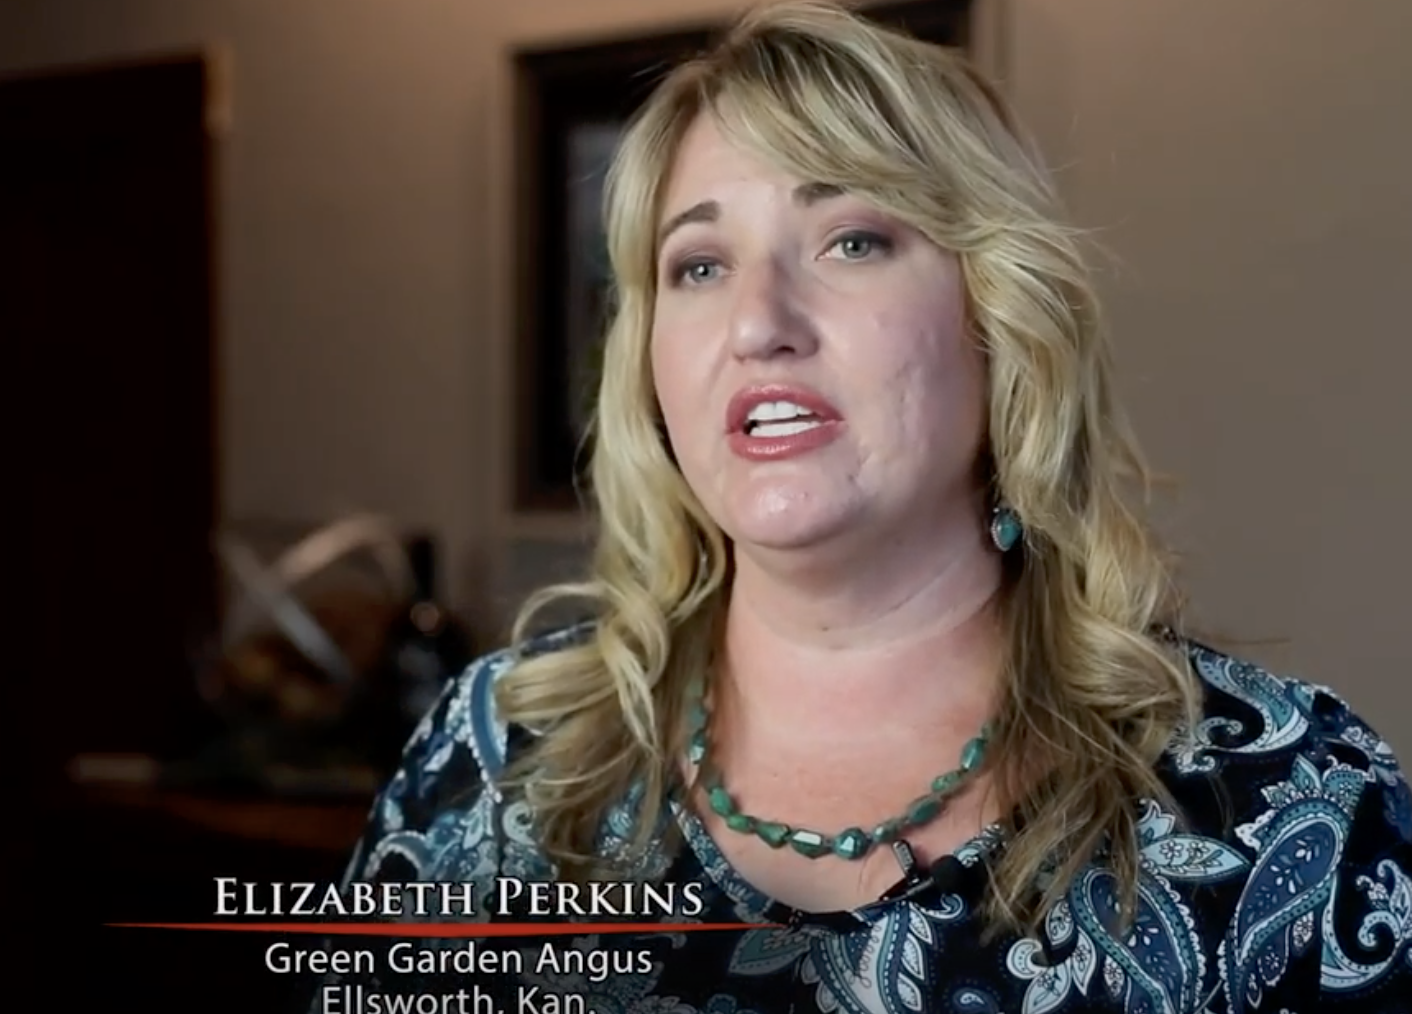 Elizabeth Perkins Talks About Her Family's Results with Certified Angus Beef 